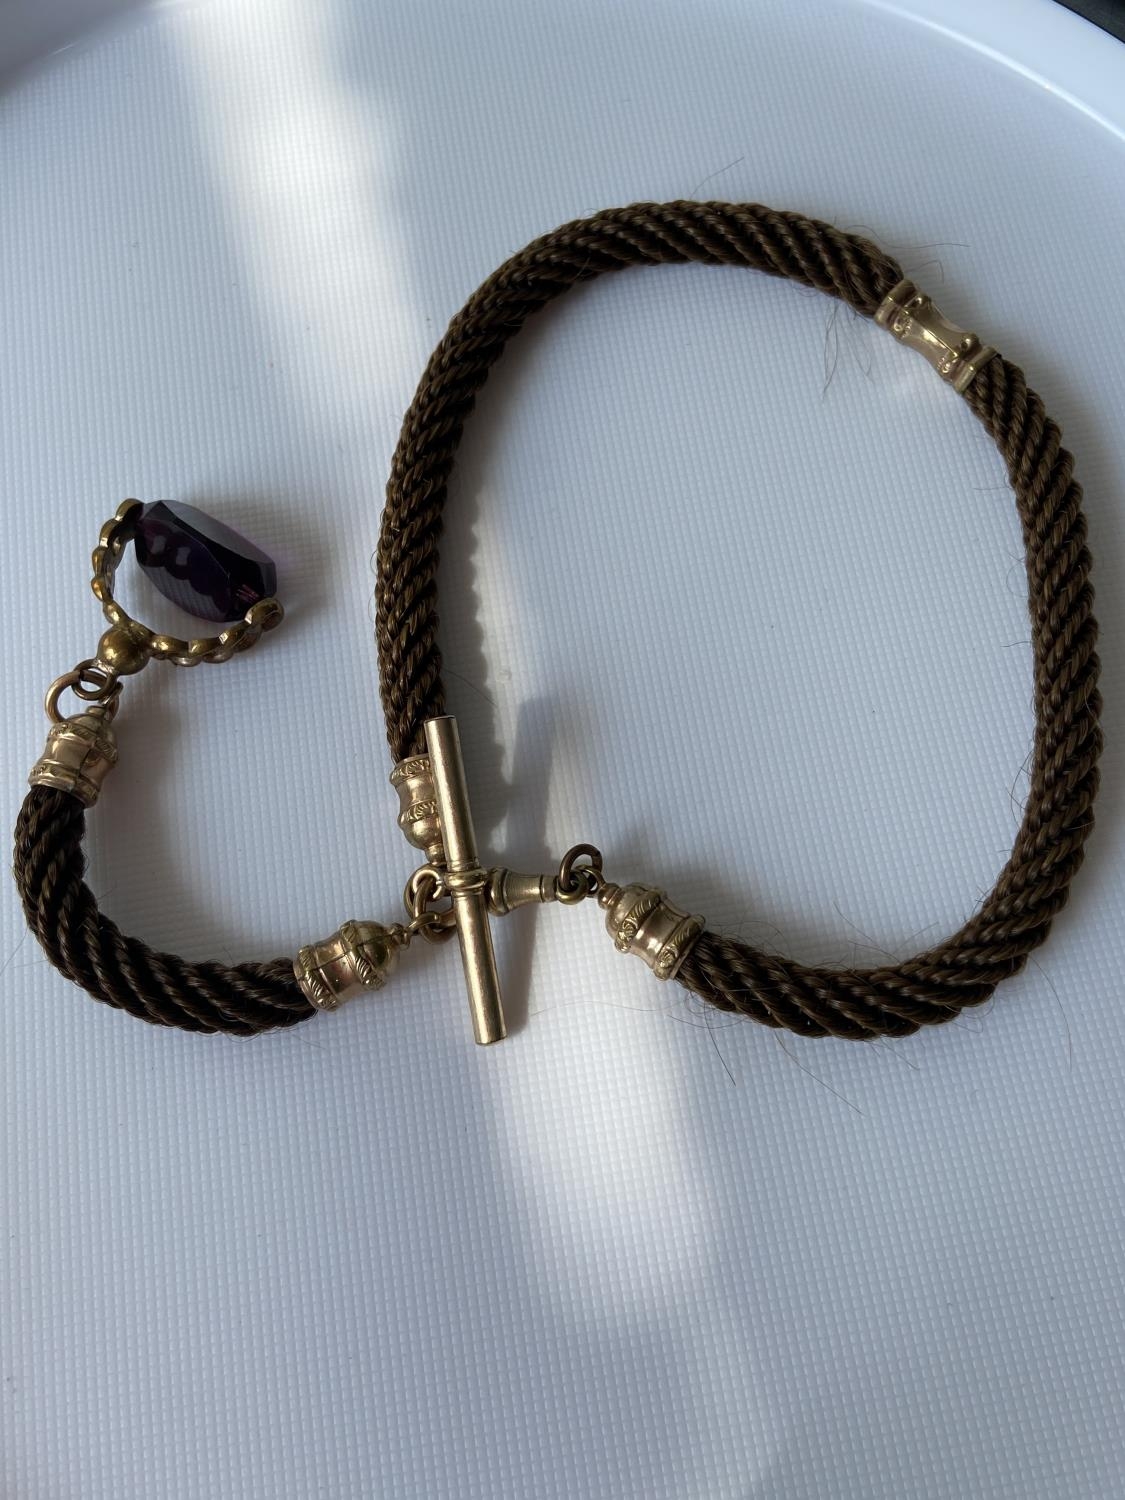 A 19th century albert chain made from braided hair, gilt metal attachments and amethyst & gilt metal